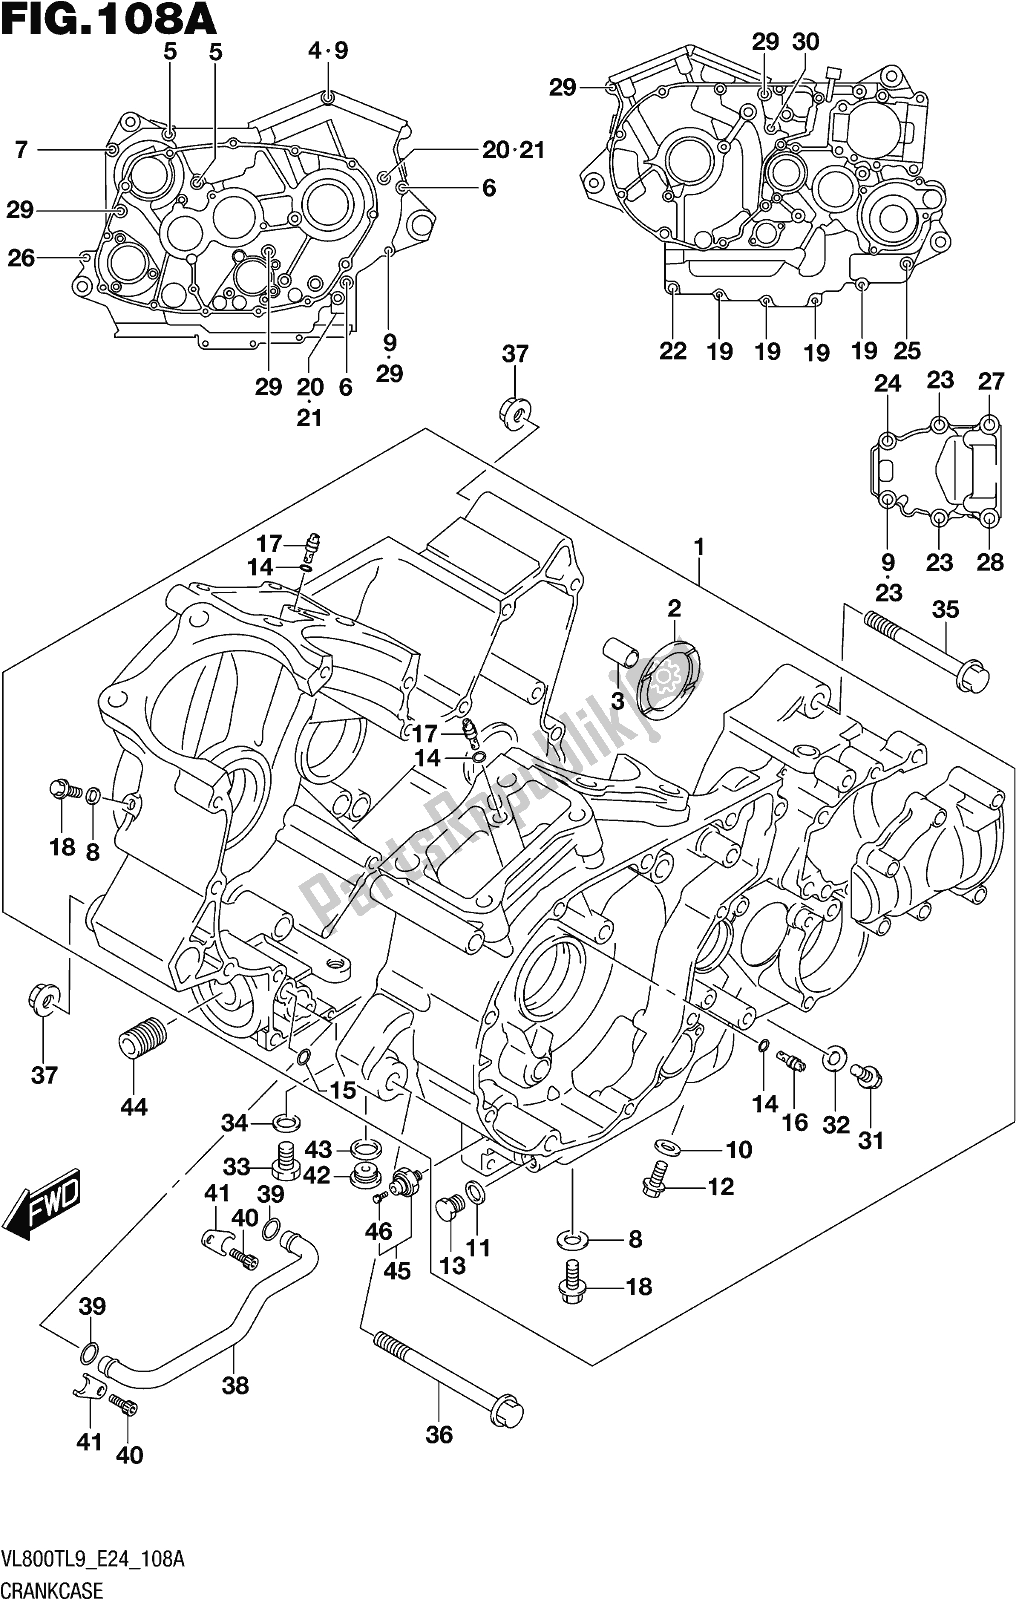 All parts for the Fig. 108a Crankcase of the Suzuki VL 800T 2019